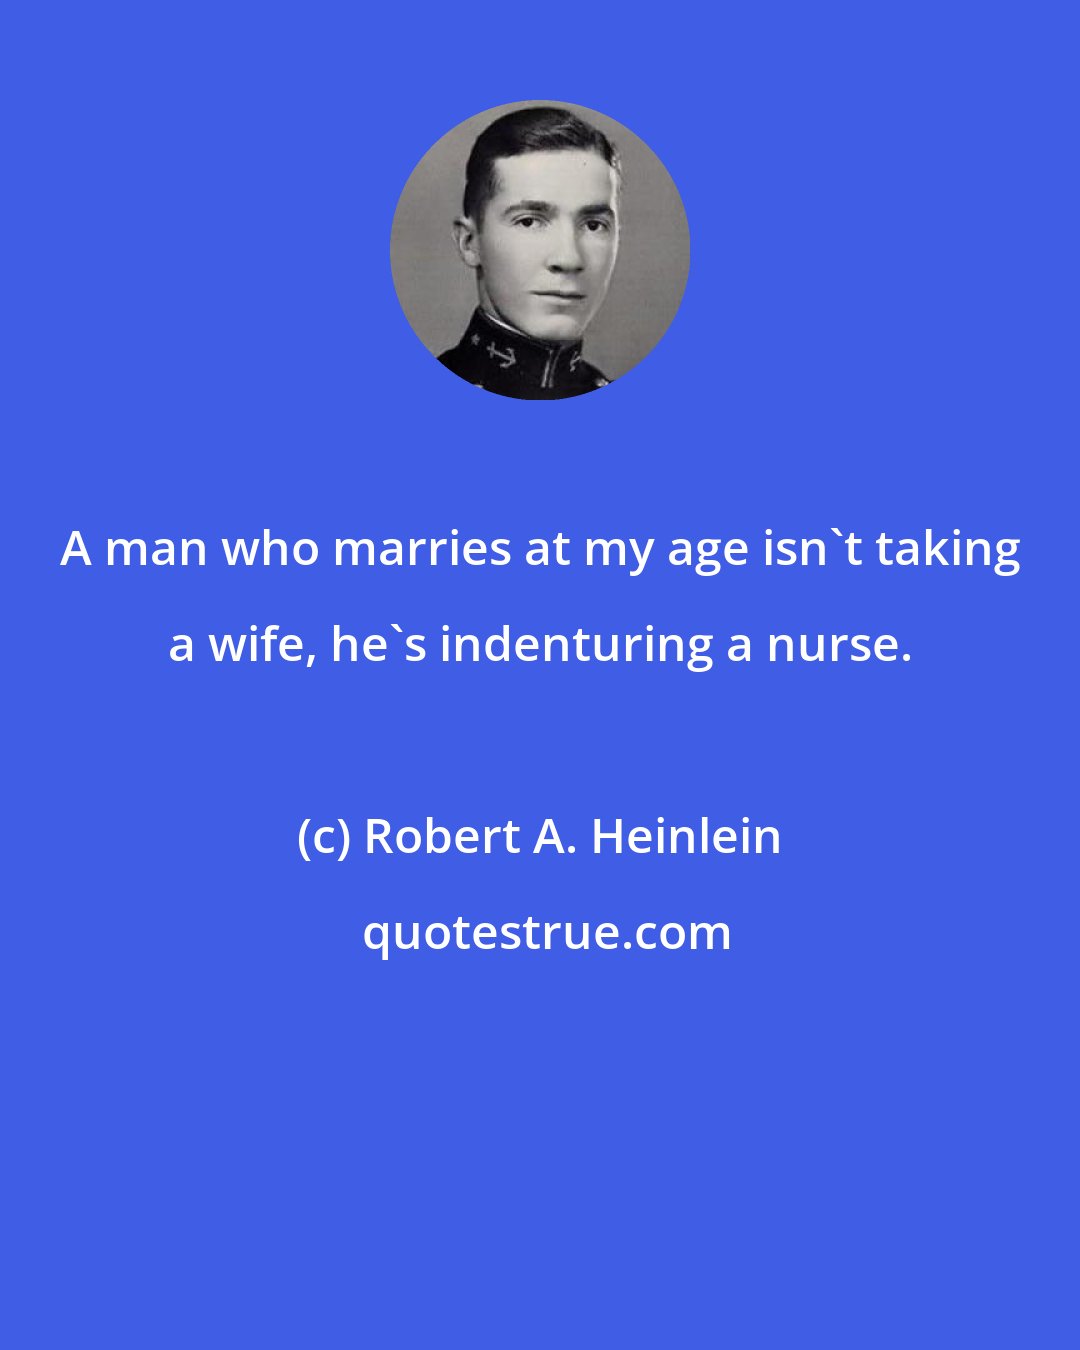 Robert A. Heinlein: A man who marries at my age isn't taking a wife, he's indenturing a nurse.